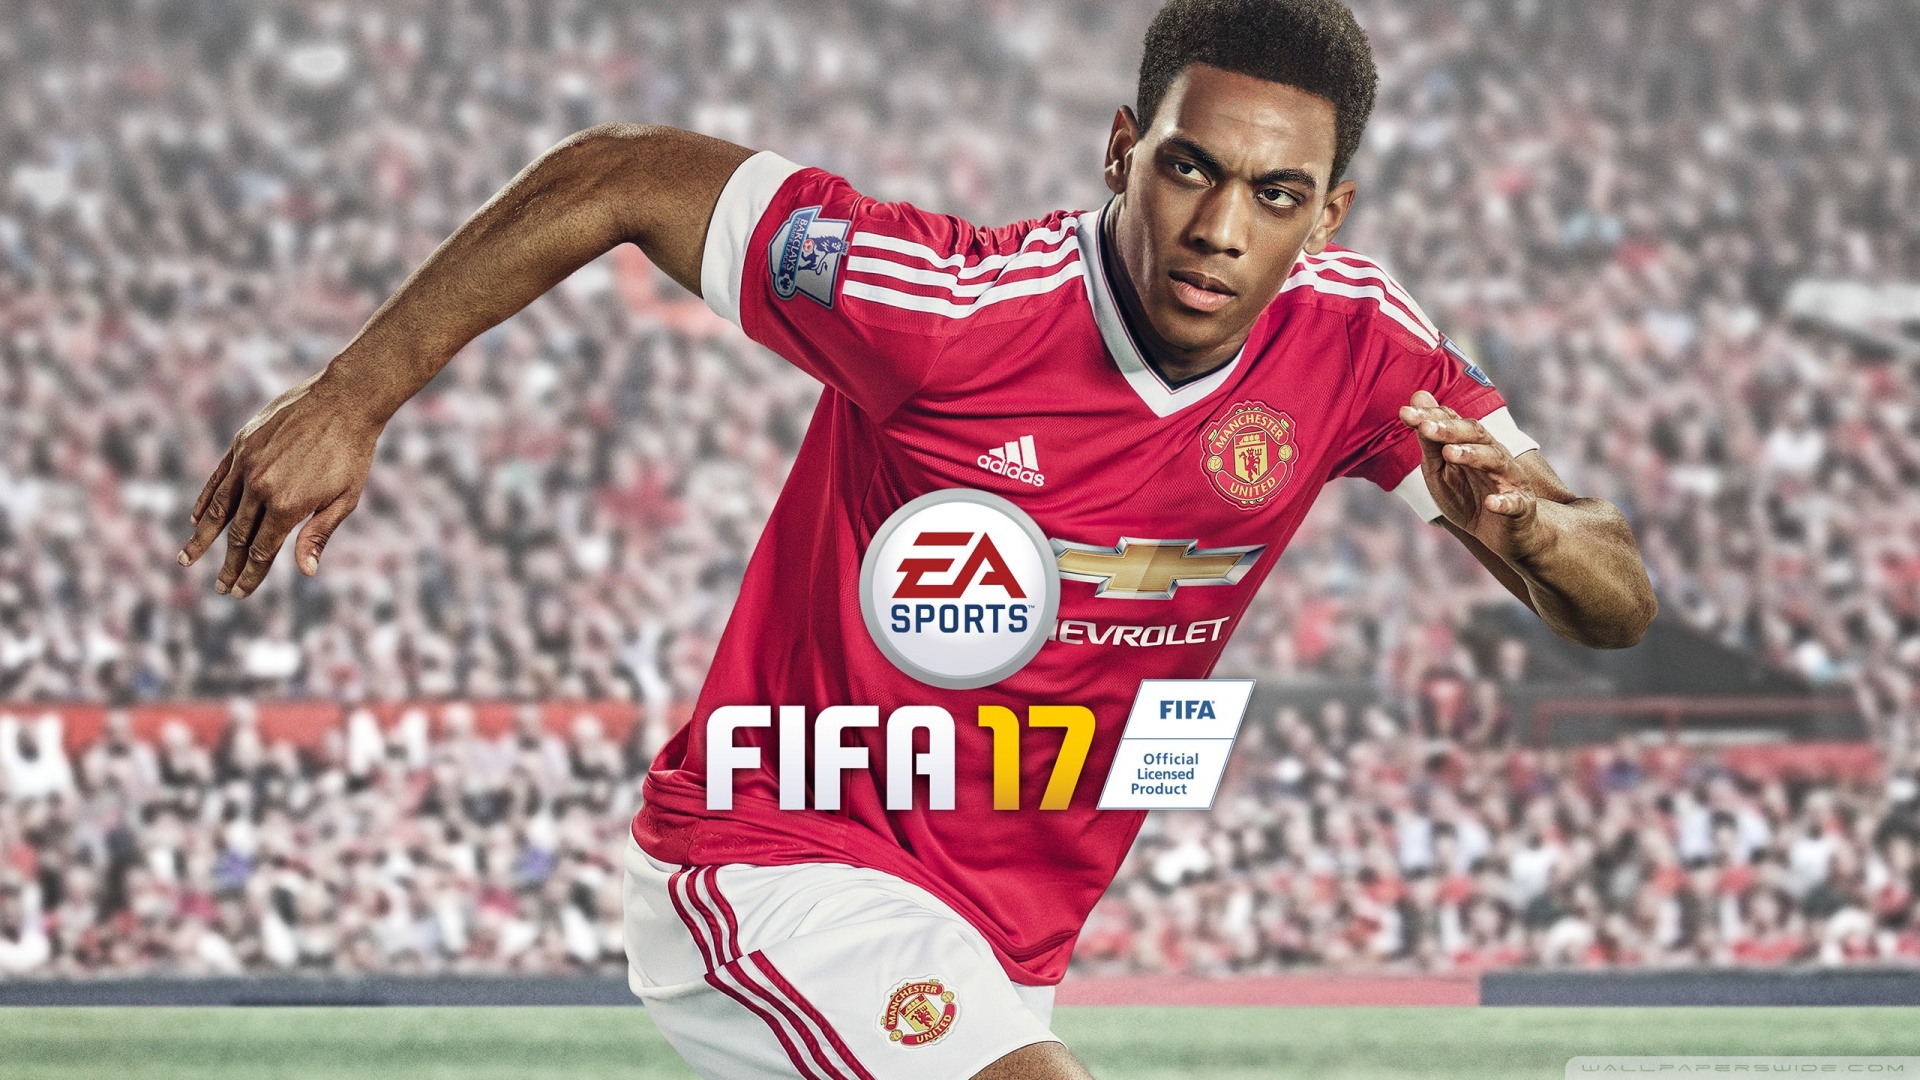 Anthony Martial Fifa 17 - HD Wallpaper 